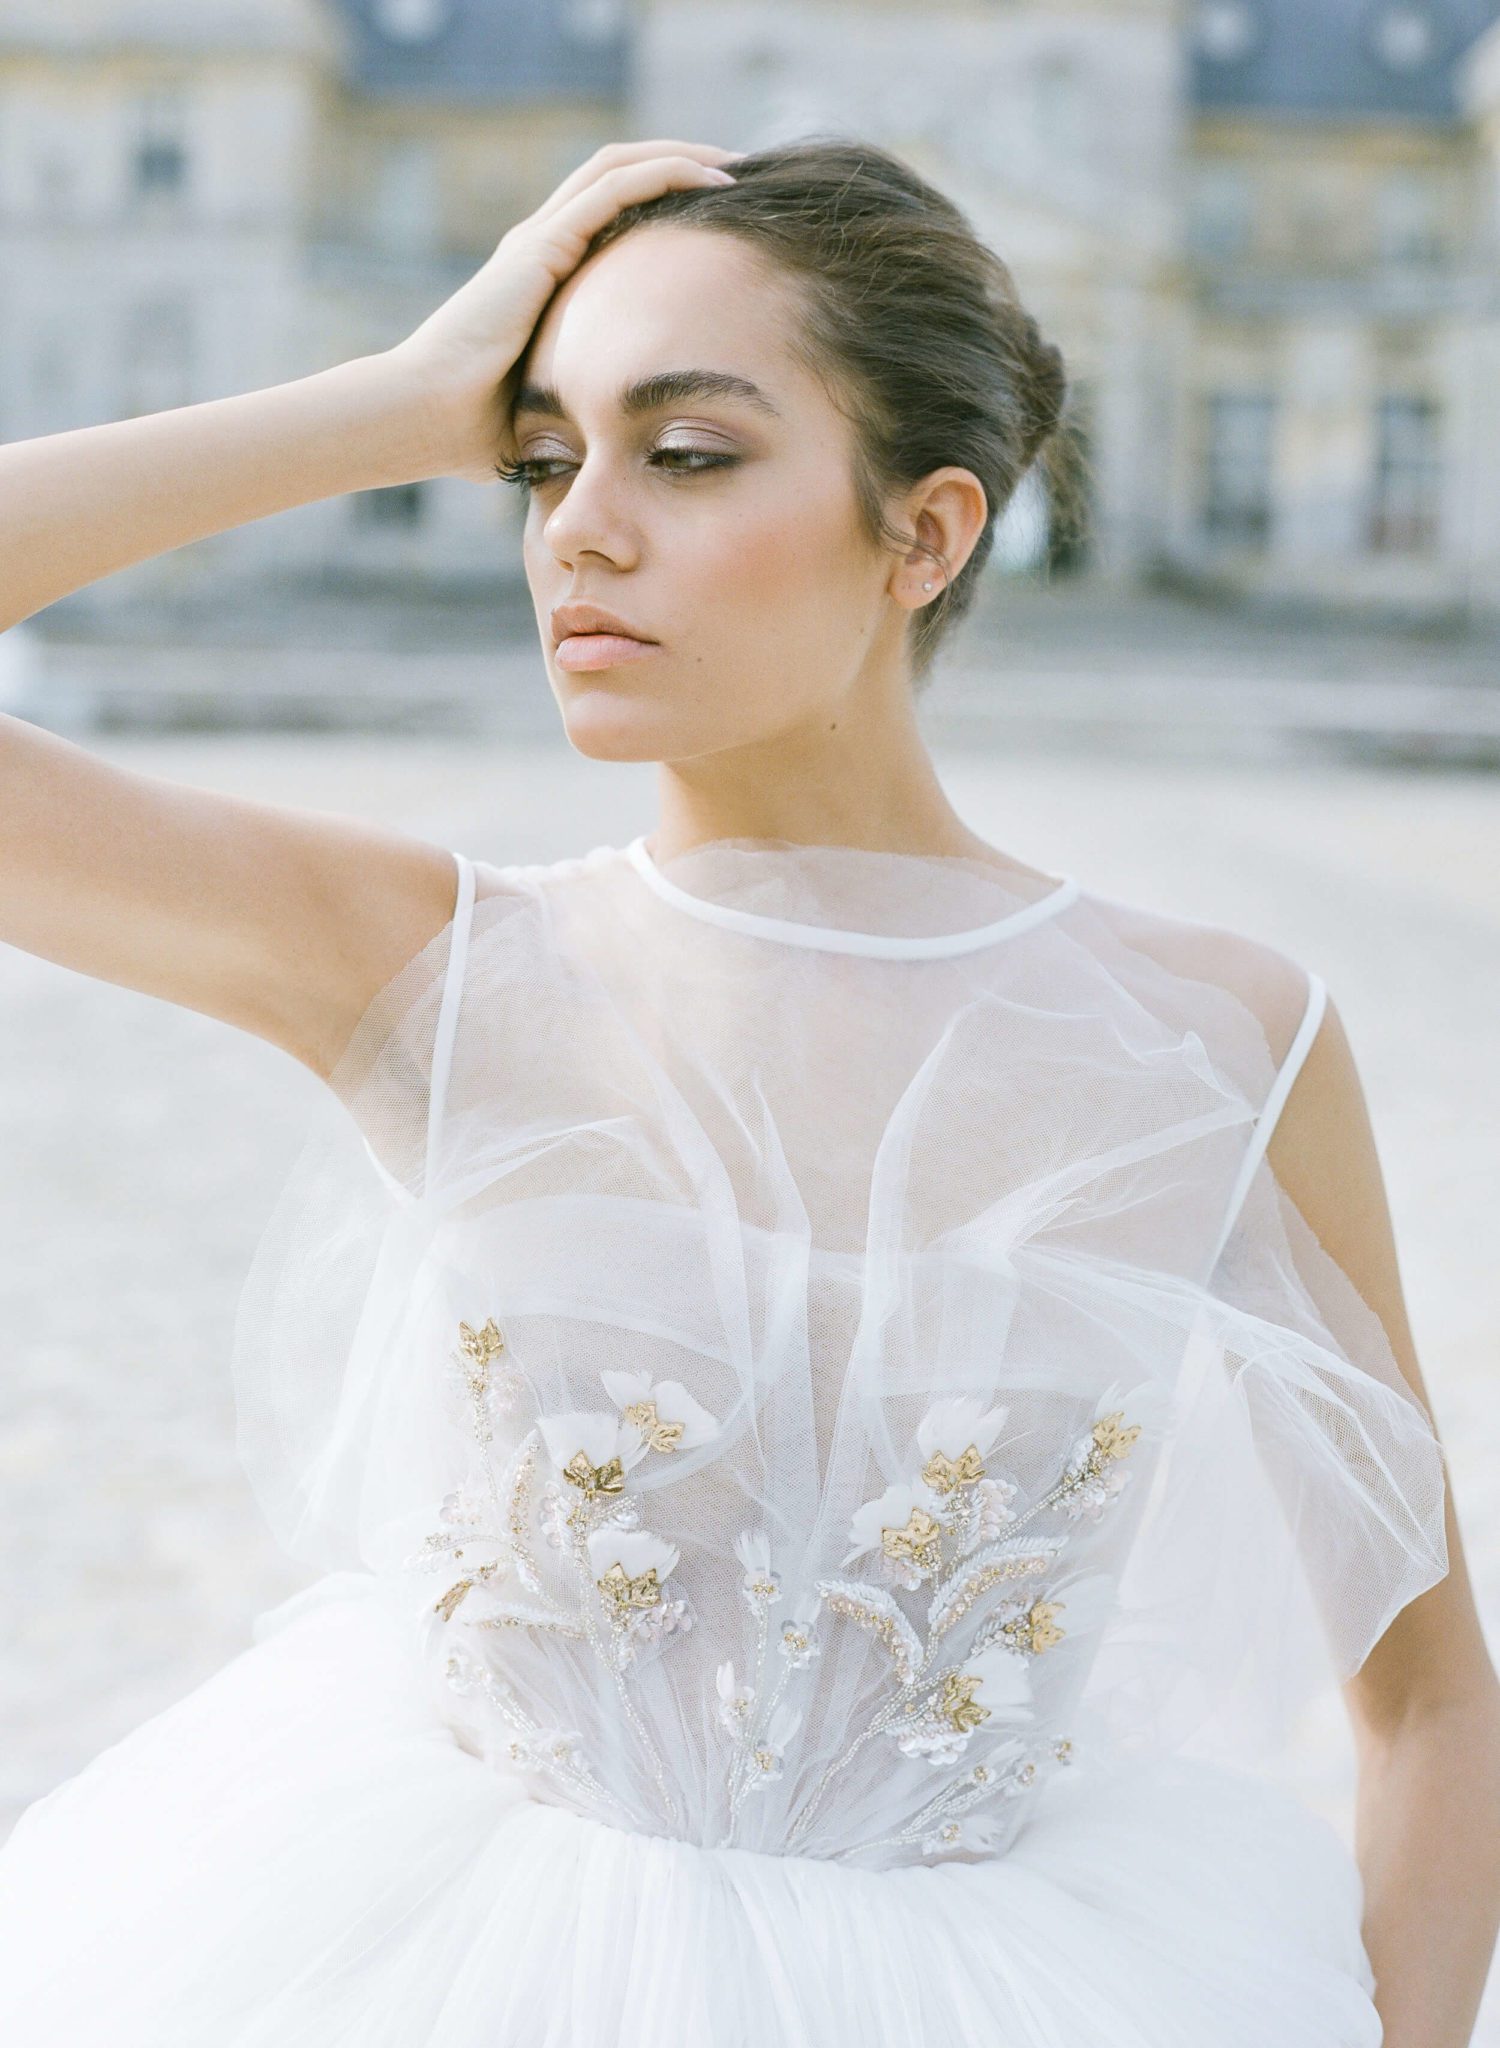 23 of The Most Epic Bridal Gowns I’ve Photographed - KT Merry